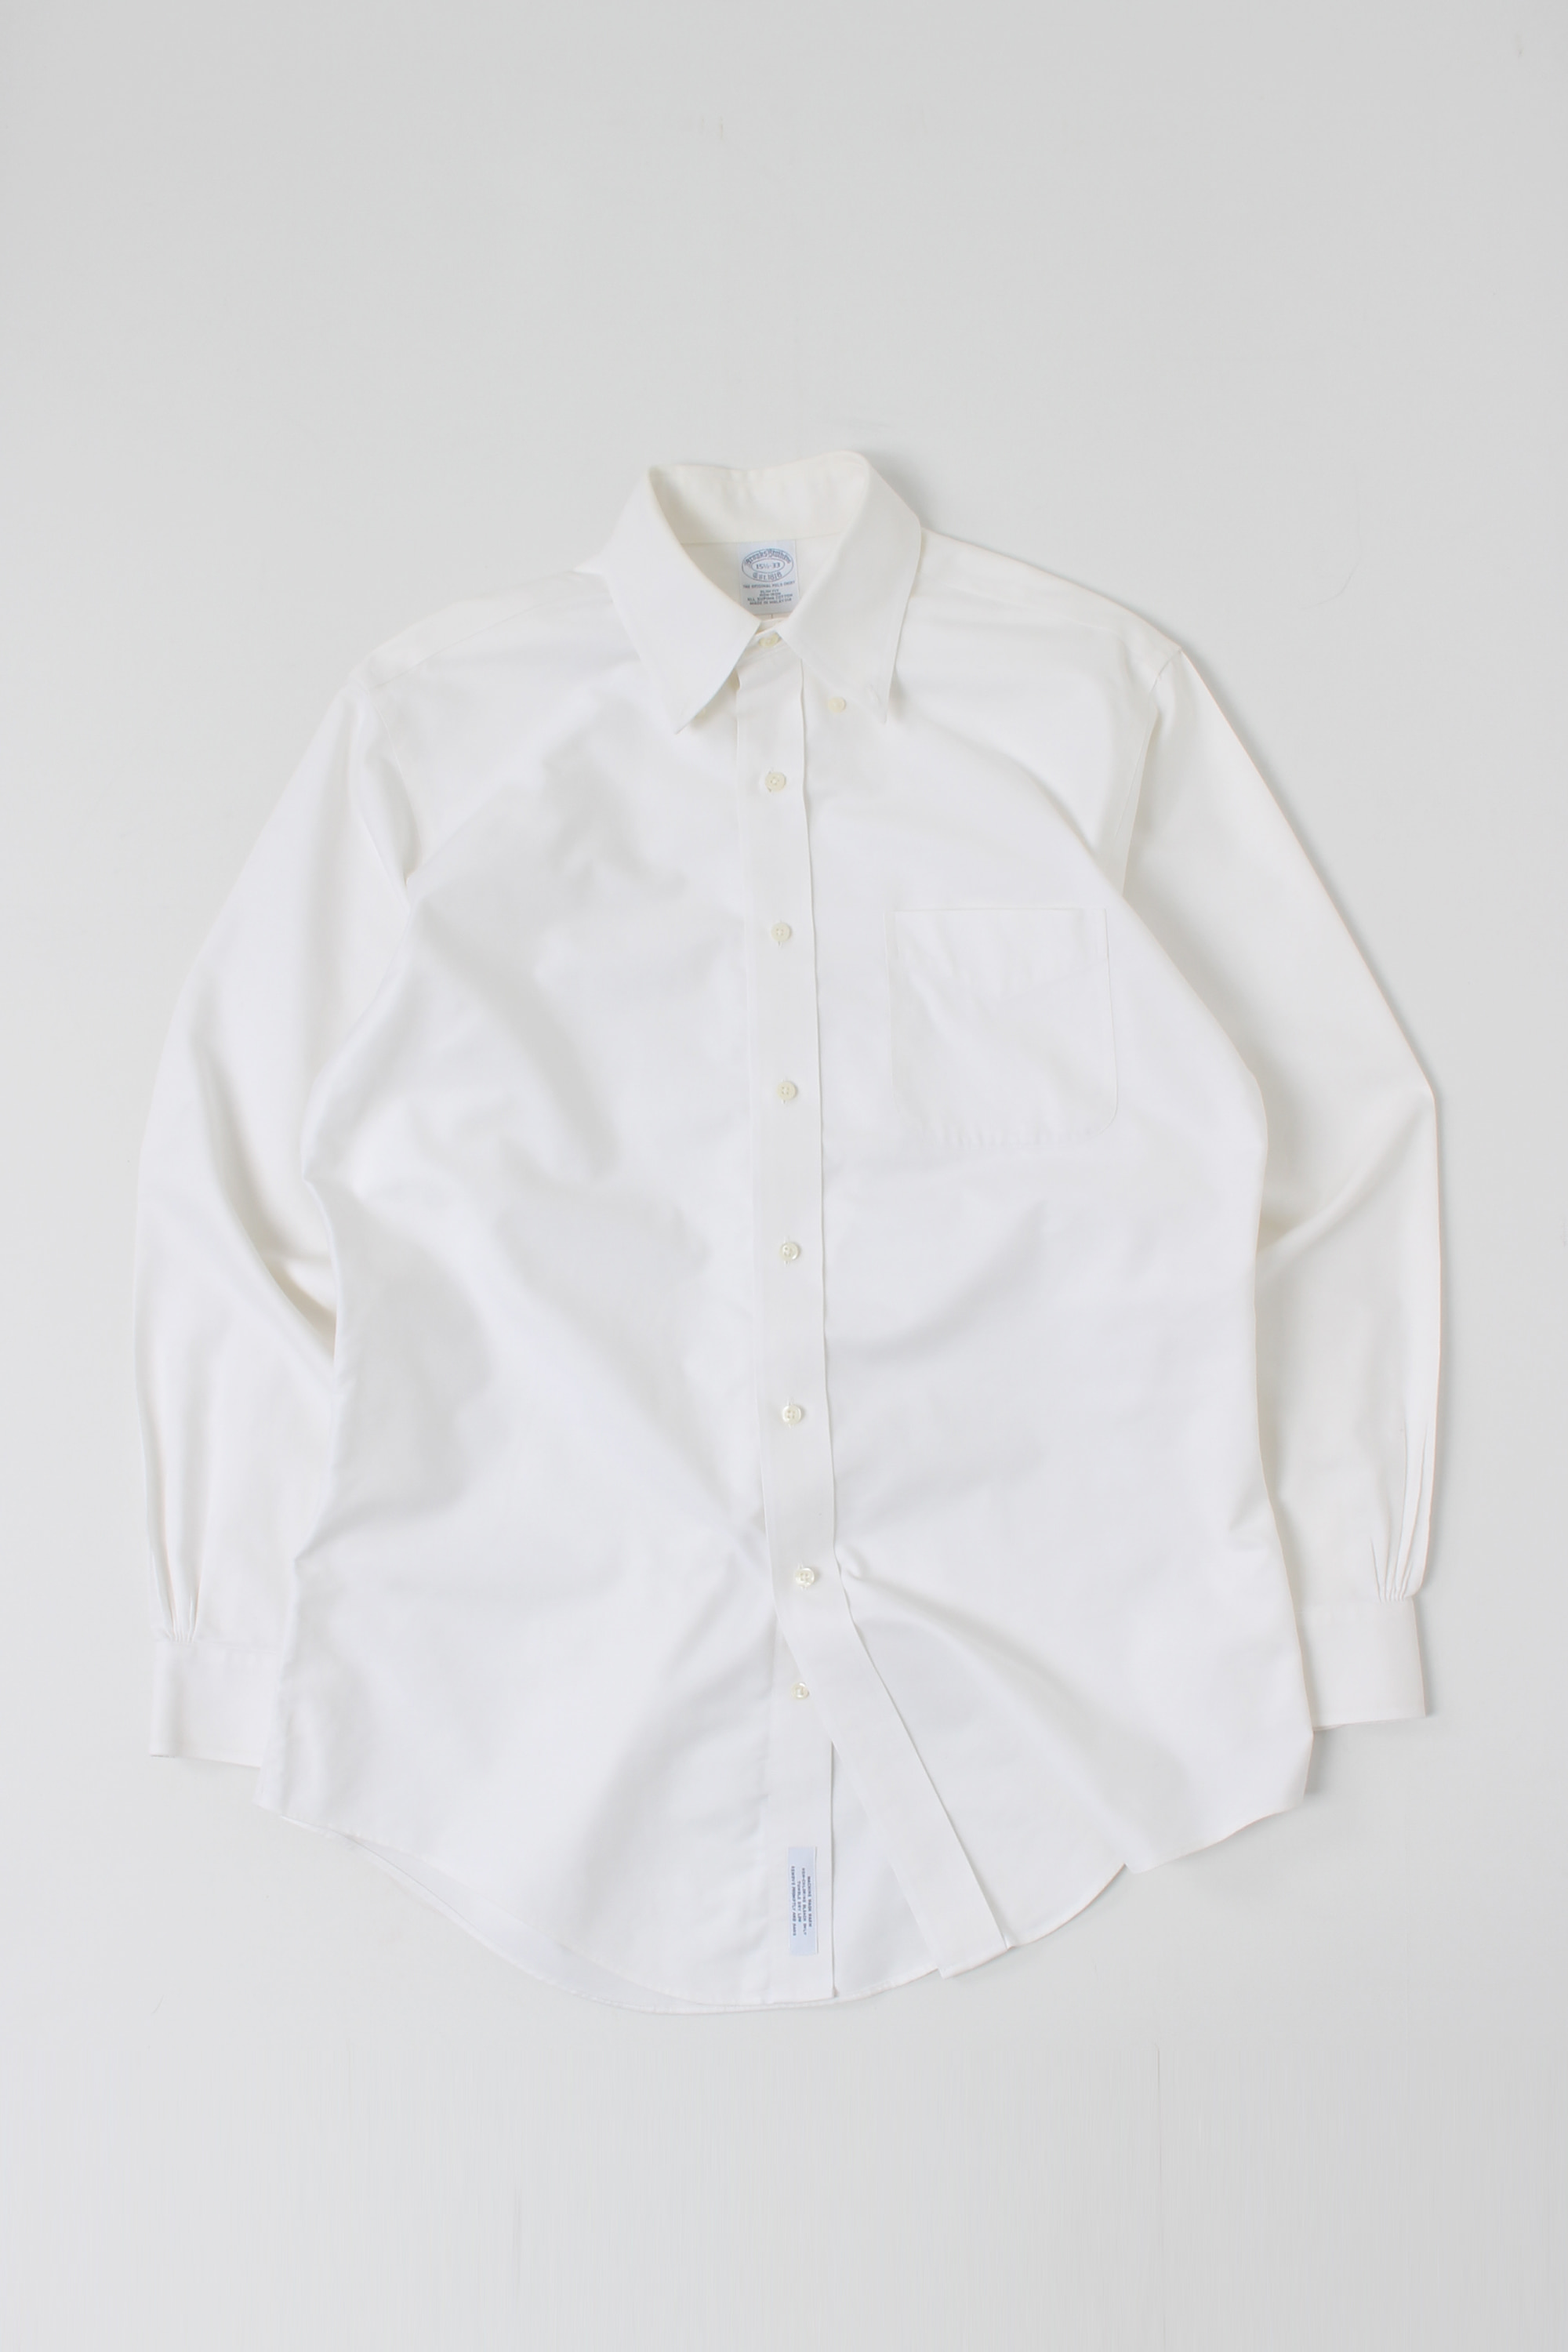 Brooks Brothers Button Down Shirts(15 1/2-33)